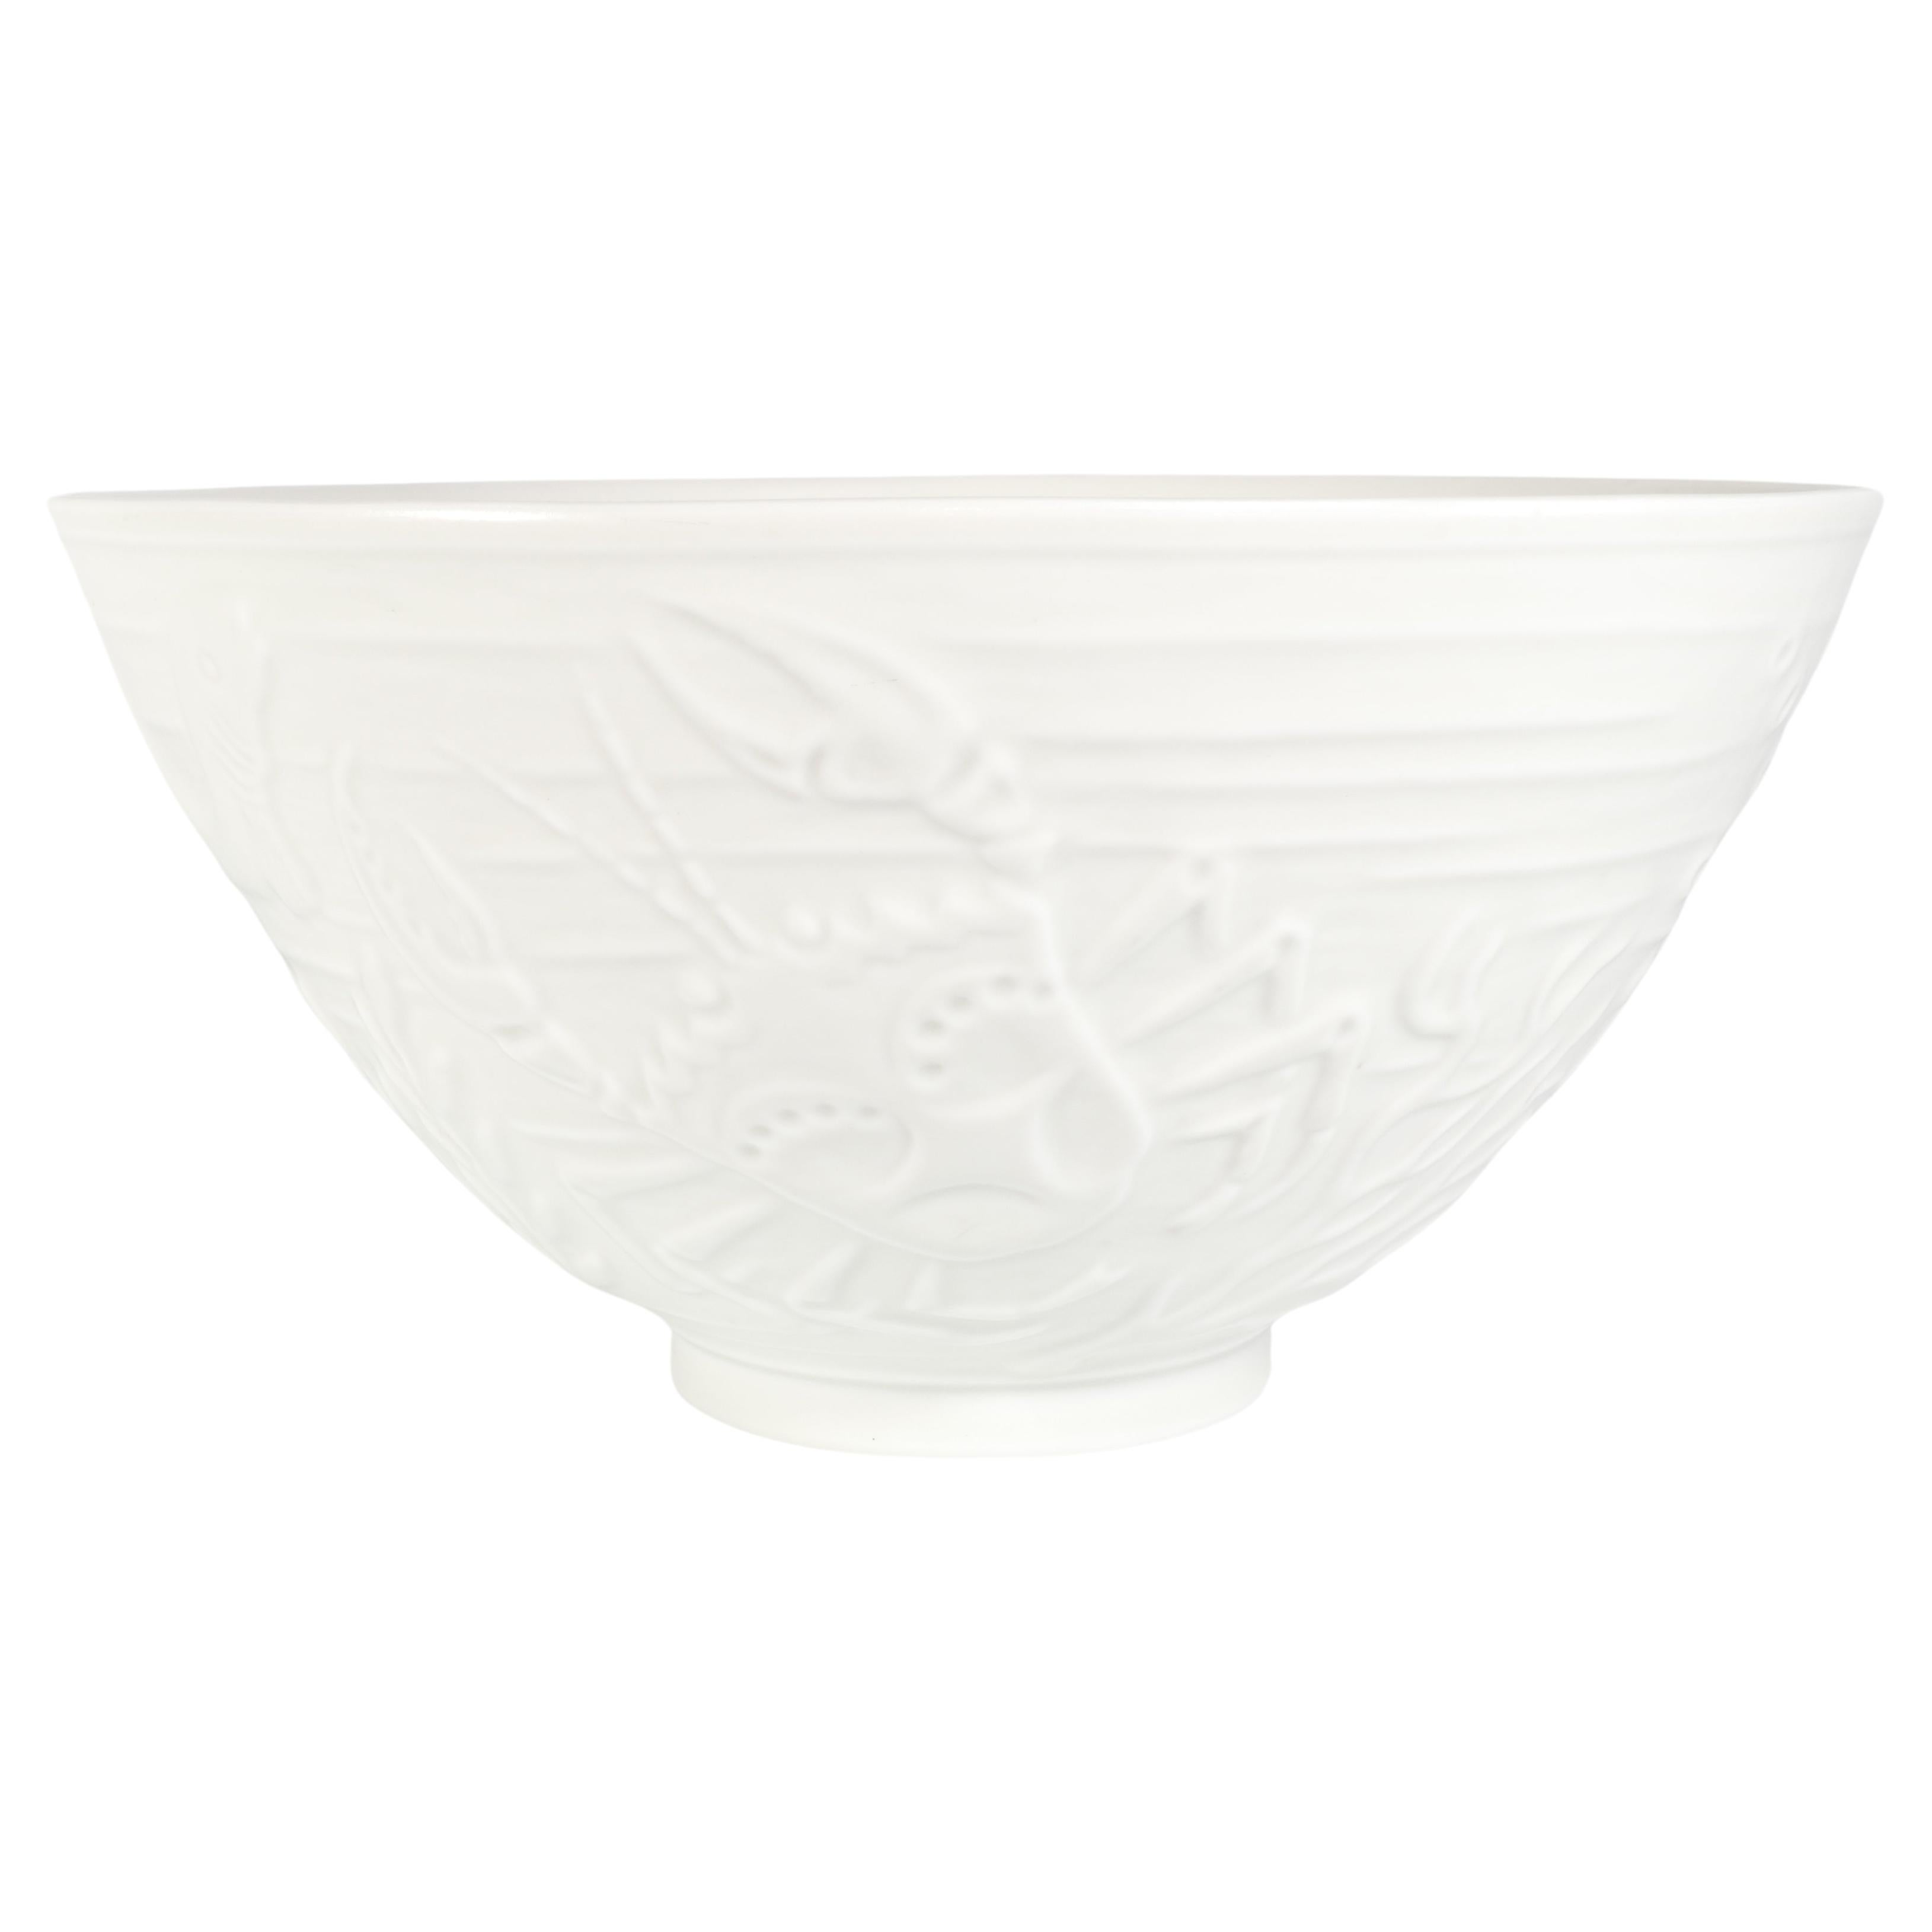 Swedish Grace White Porcelain Sea Themed  Bowl by Gunnar Nylund for ALP, 1940's